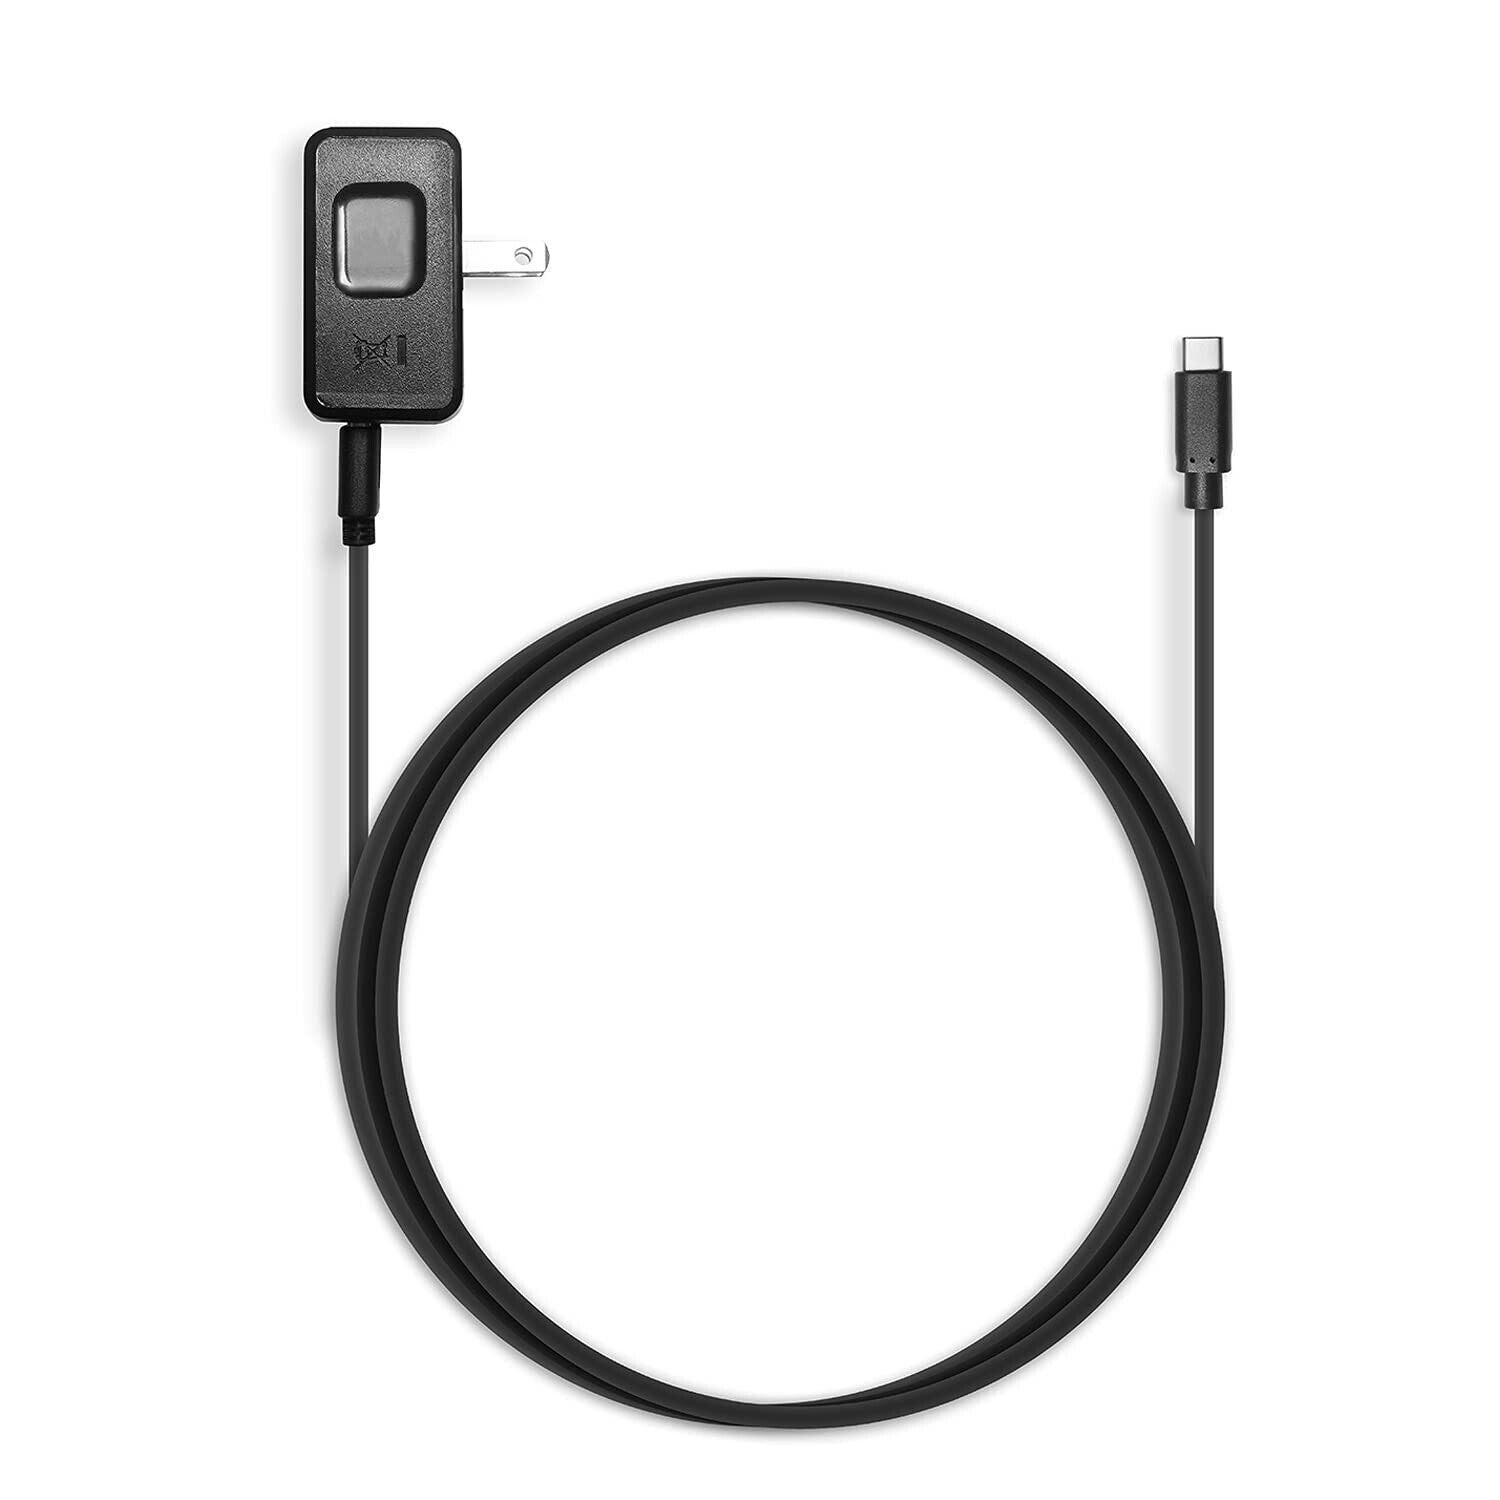 Ororo Universal USB-C (MFI Certified) Charger with EU and UK Adapters